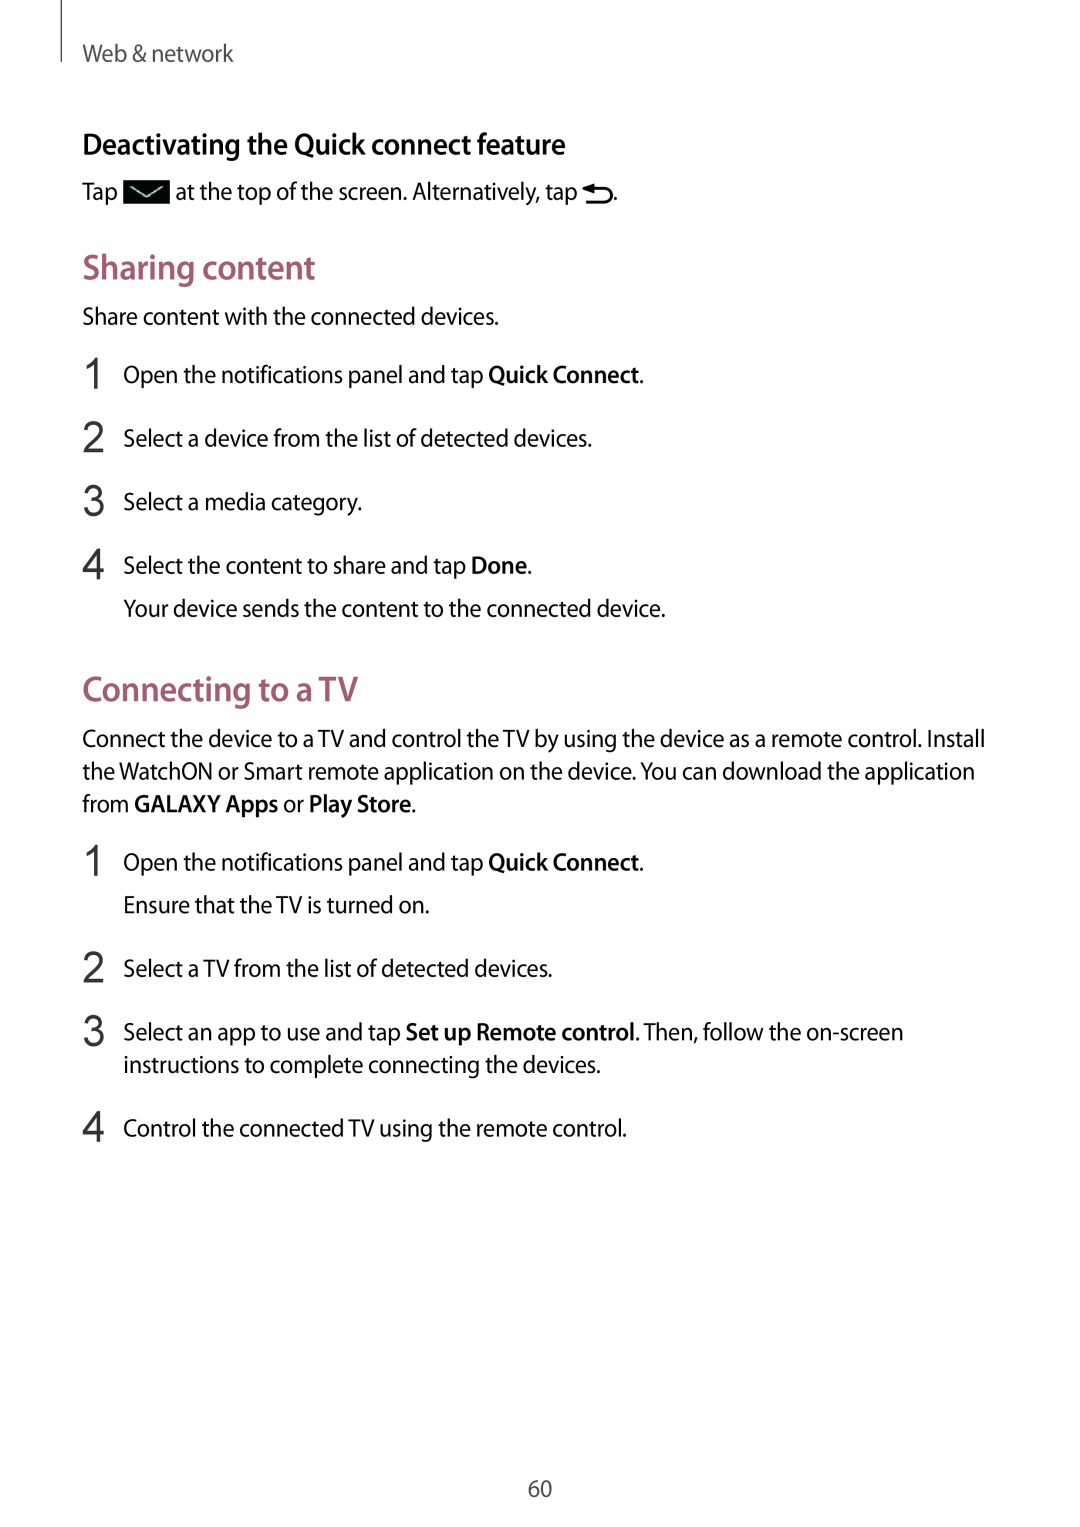 Samsung GT-I9195DKIXEF manual Sharing content, Connecting to a TV, Deactivating the Quick connect feature, Web & network 